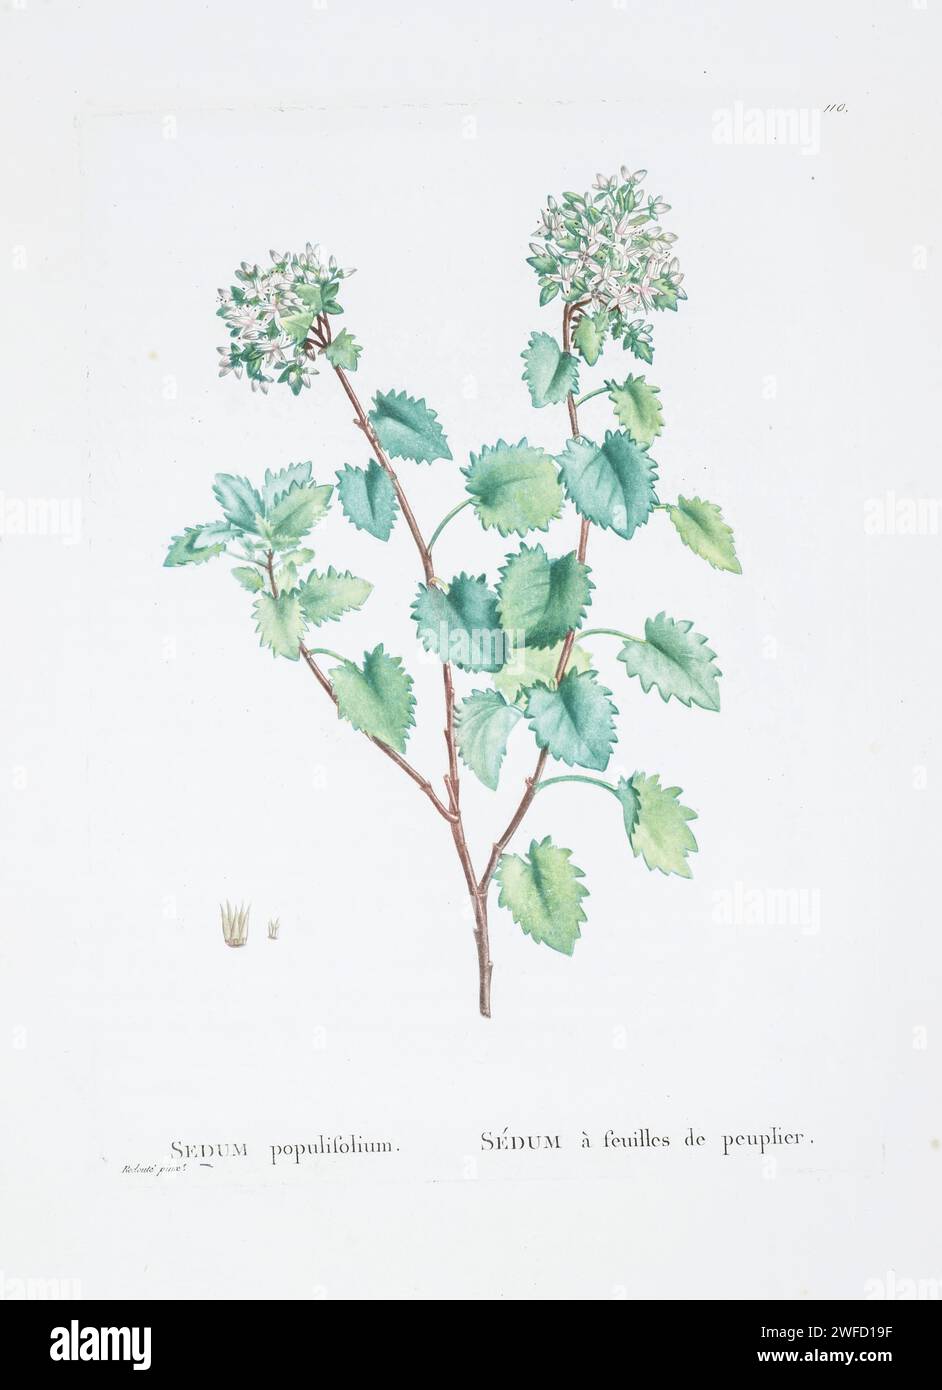 Sedum populifolium from History of Succulent Plants [Plantarum historia succulentarum / Histoire des plantes grasses] painted by Pierre-Joseph Redouté and described by Augustin Pyramus de Candolle 1799 Stock Photo